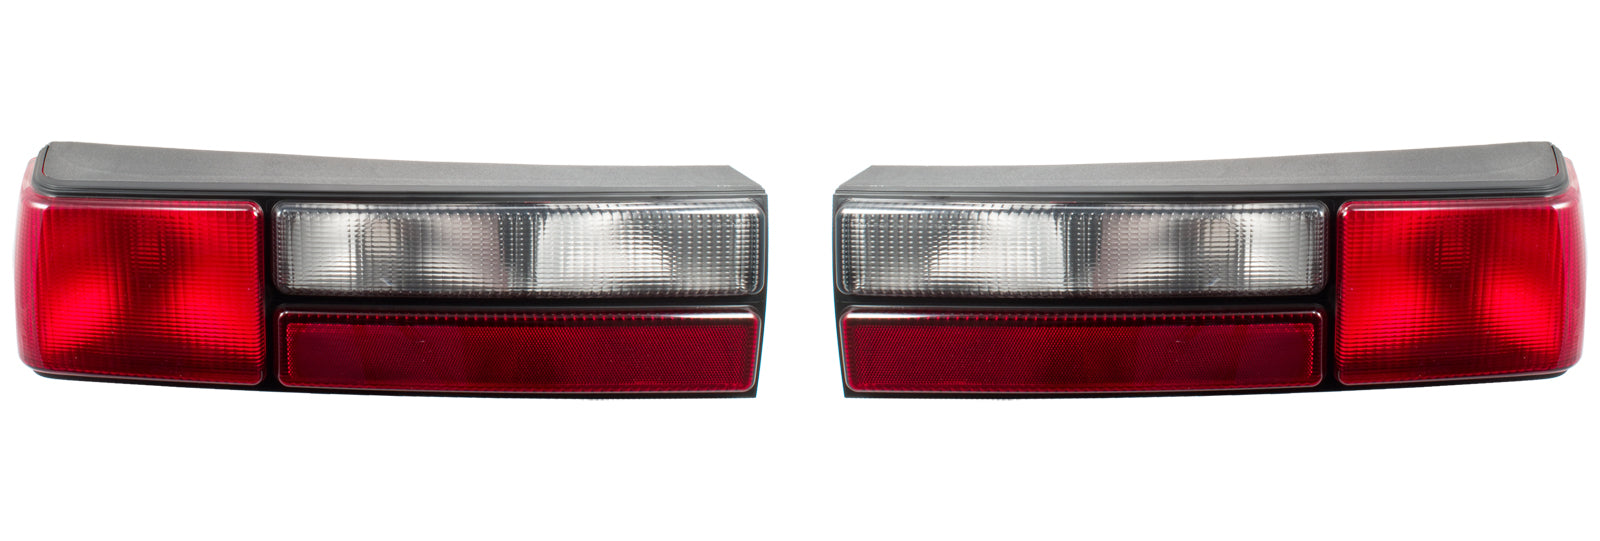 1983-1993 Ford Mustang LX Complete Taillights w/ Housings, LH RH Pair Tail Light